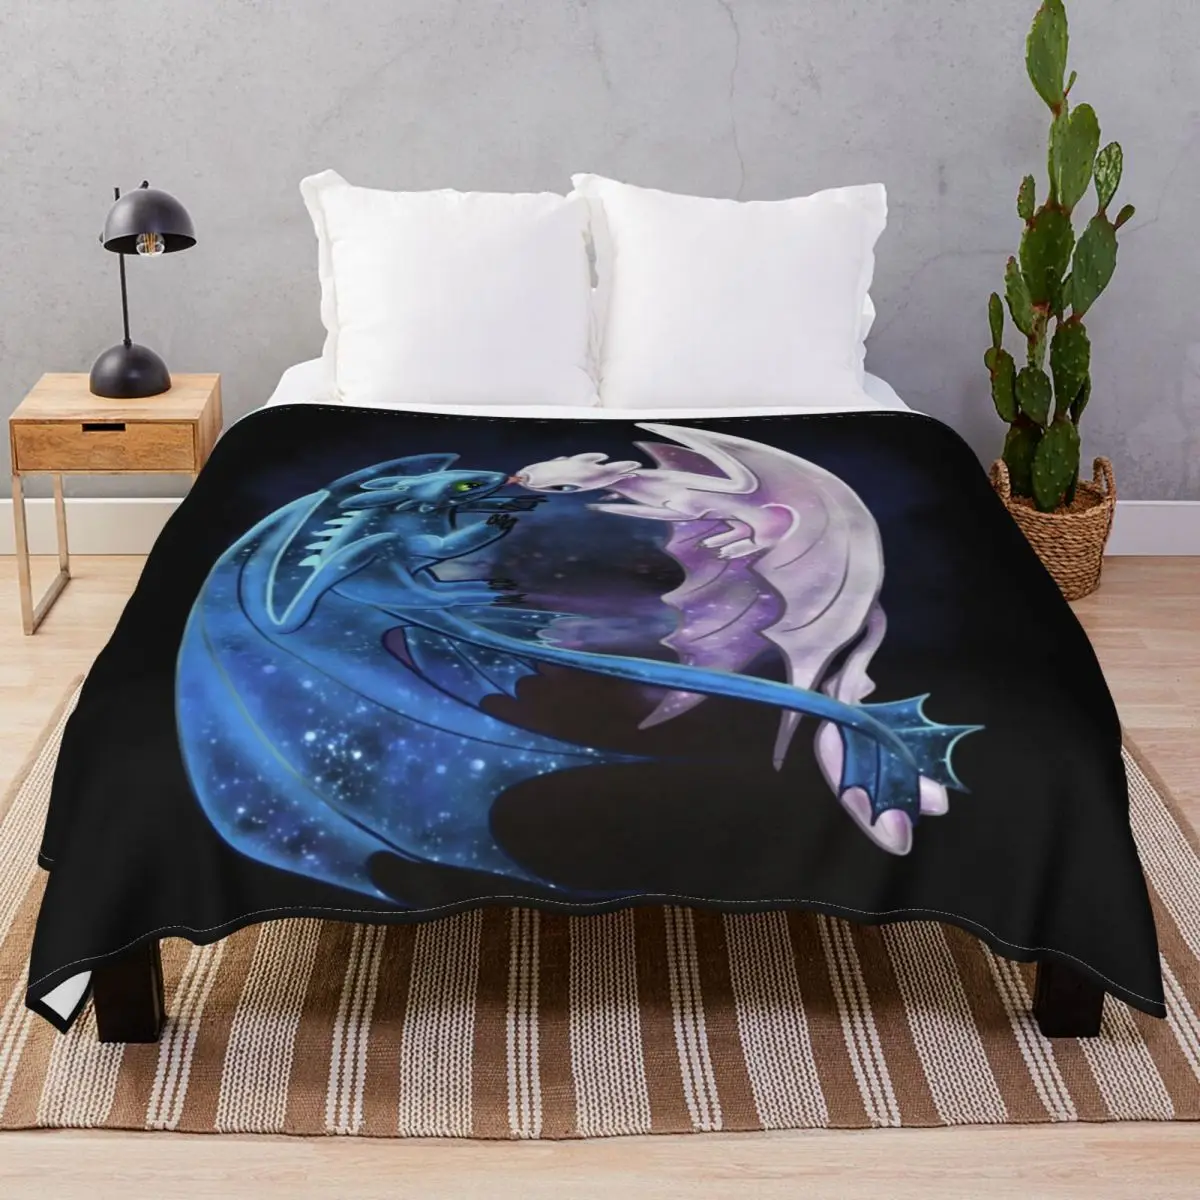 Starry Dragons And Light Fury Blanket Flannel Spring/Autumn Multifunction Throw Blankets for Bed Home Couch Travel Cinema